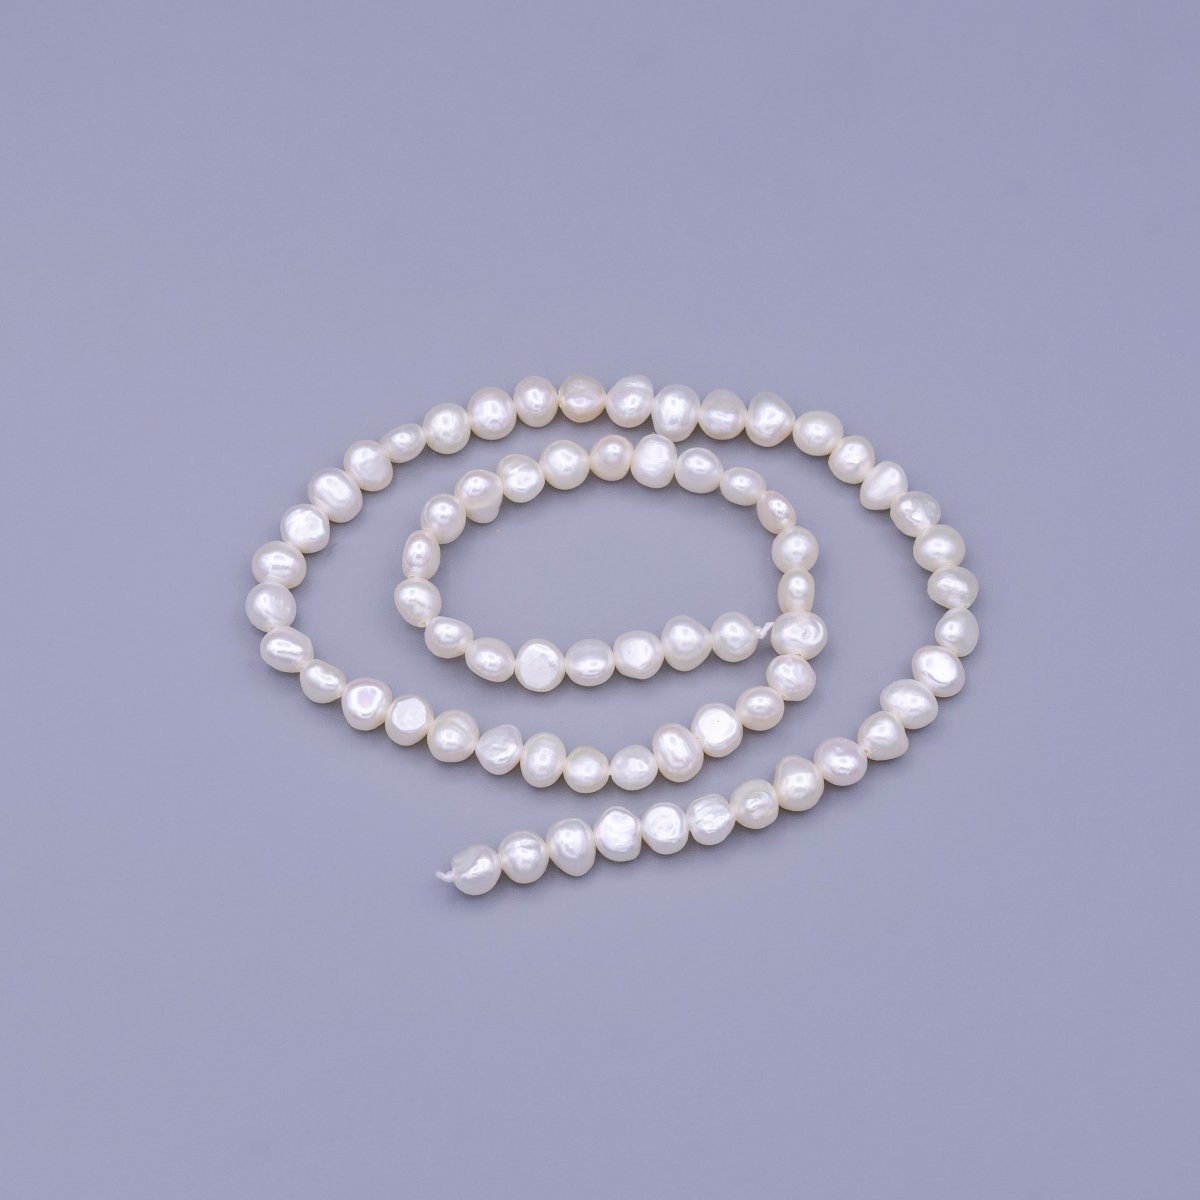 6mm Pebble Freshwater Pearl 65 Pieces/Strand Jewelry Making Findings Supply | WA-1670 Clearance Pricing - DLUXCA